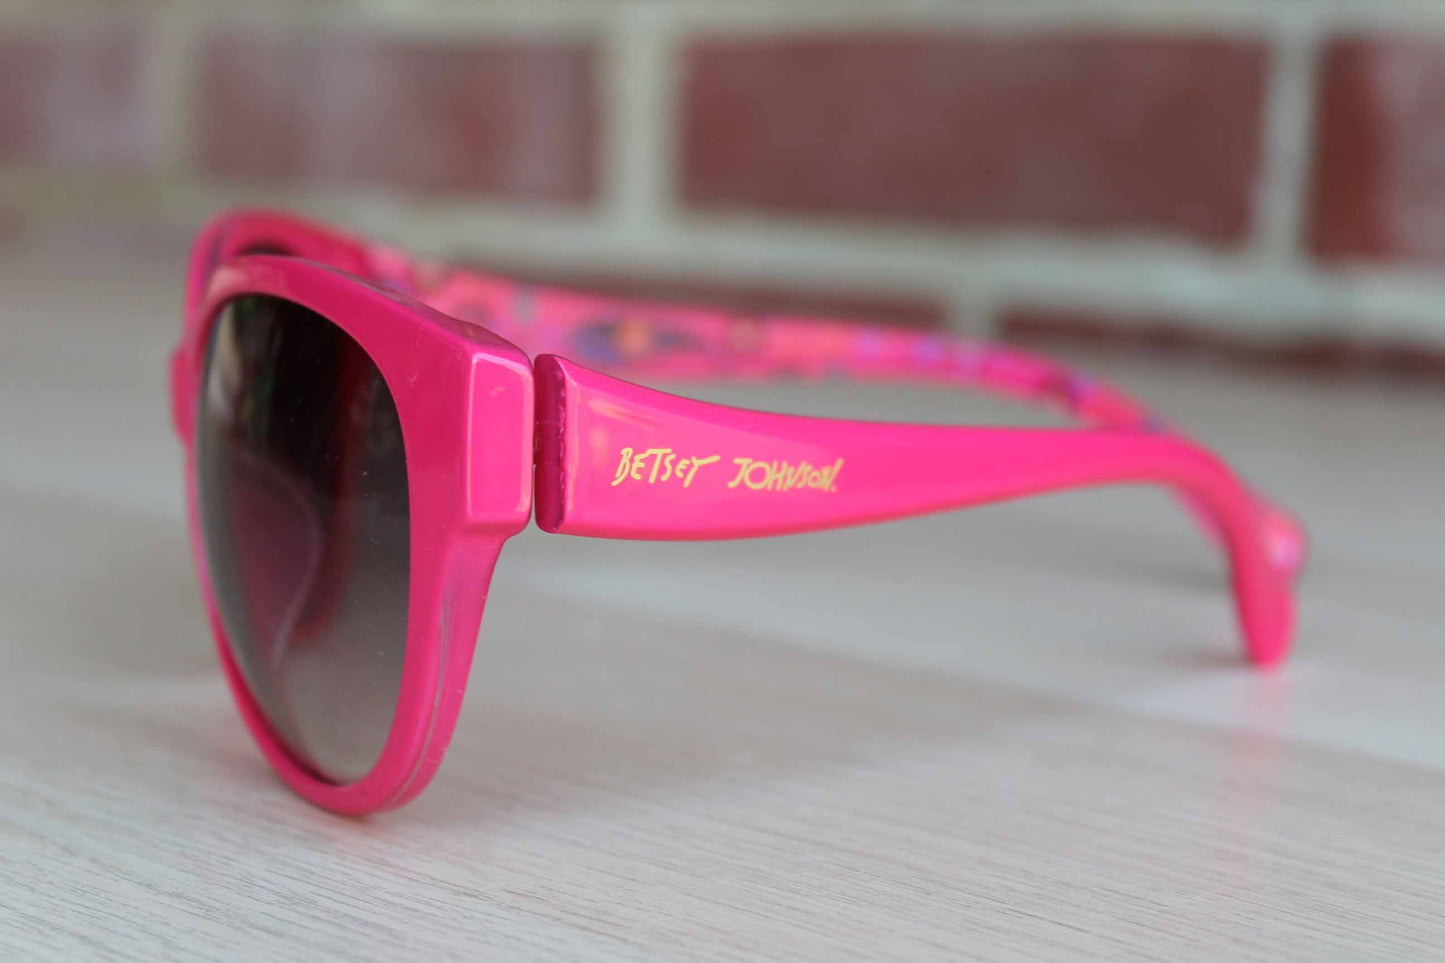 Betsey Johnson (New York, USA) Pink Plastic Sunglasses with Oval Frames